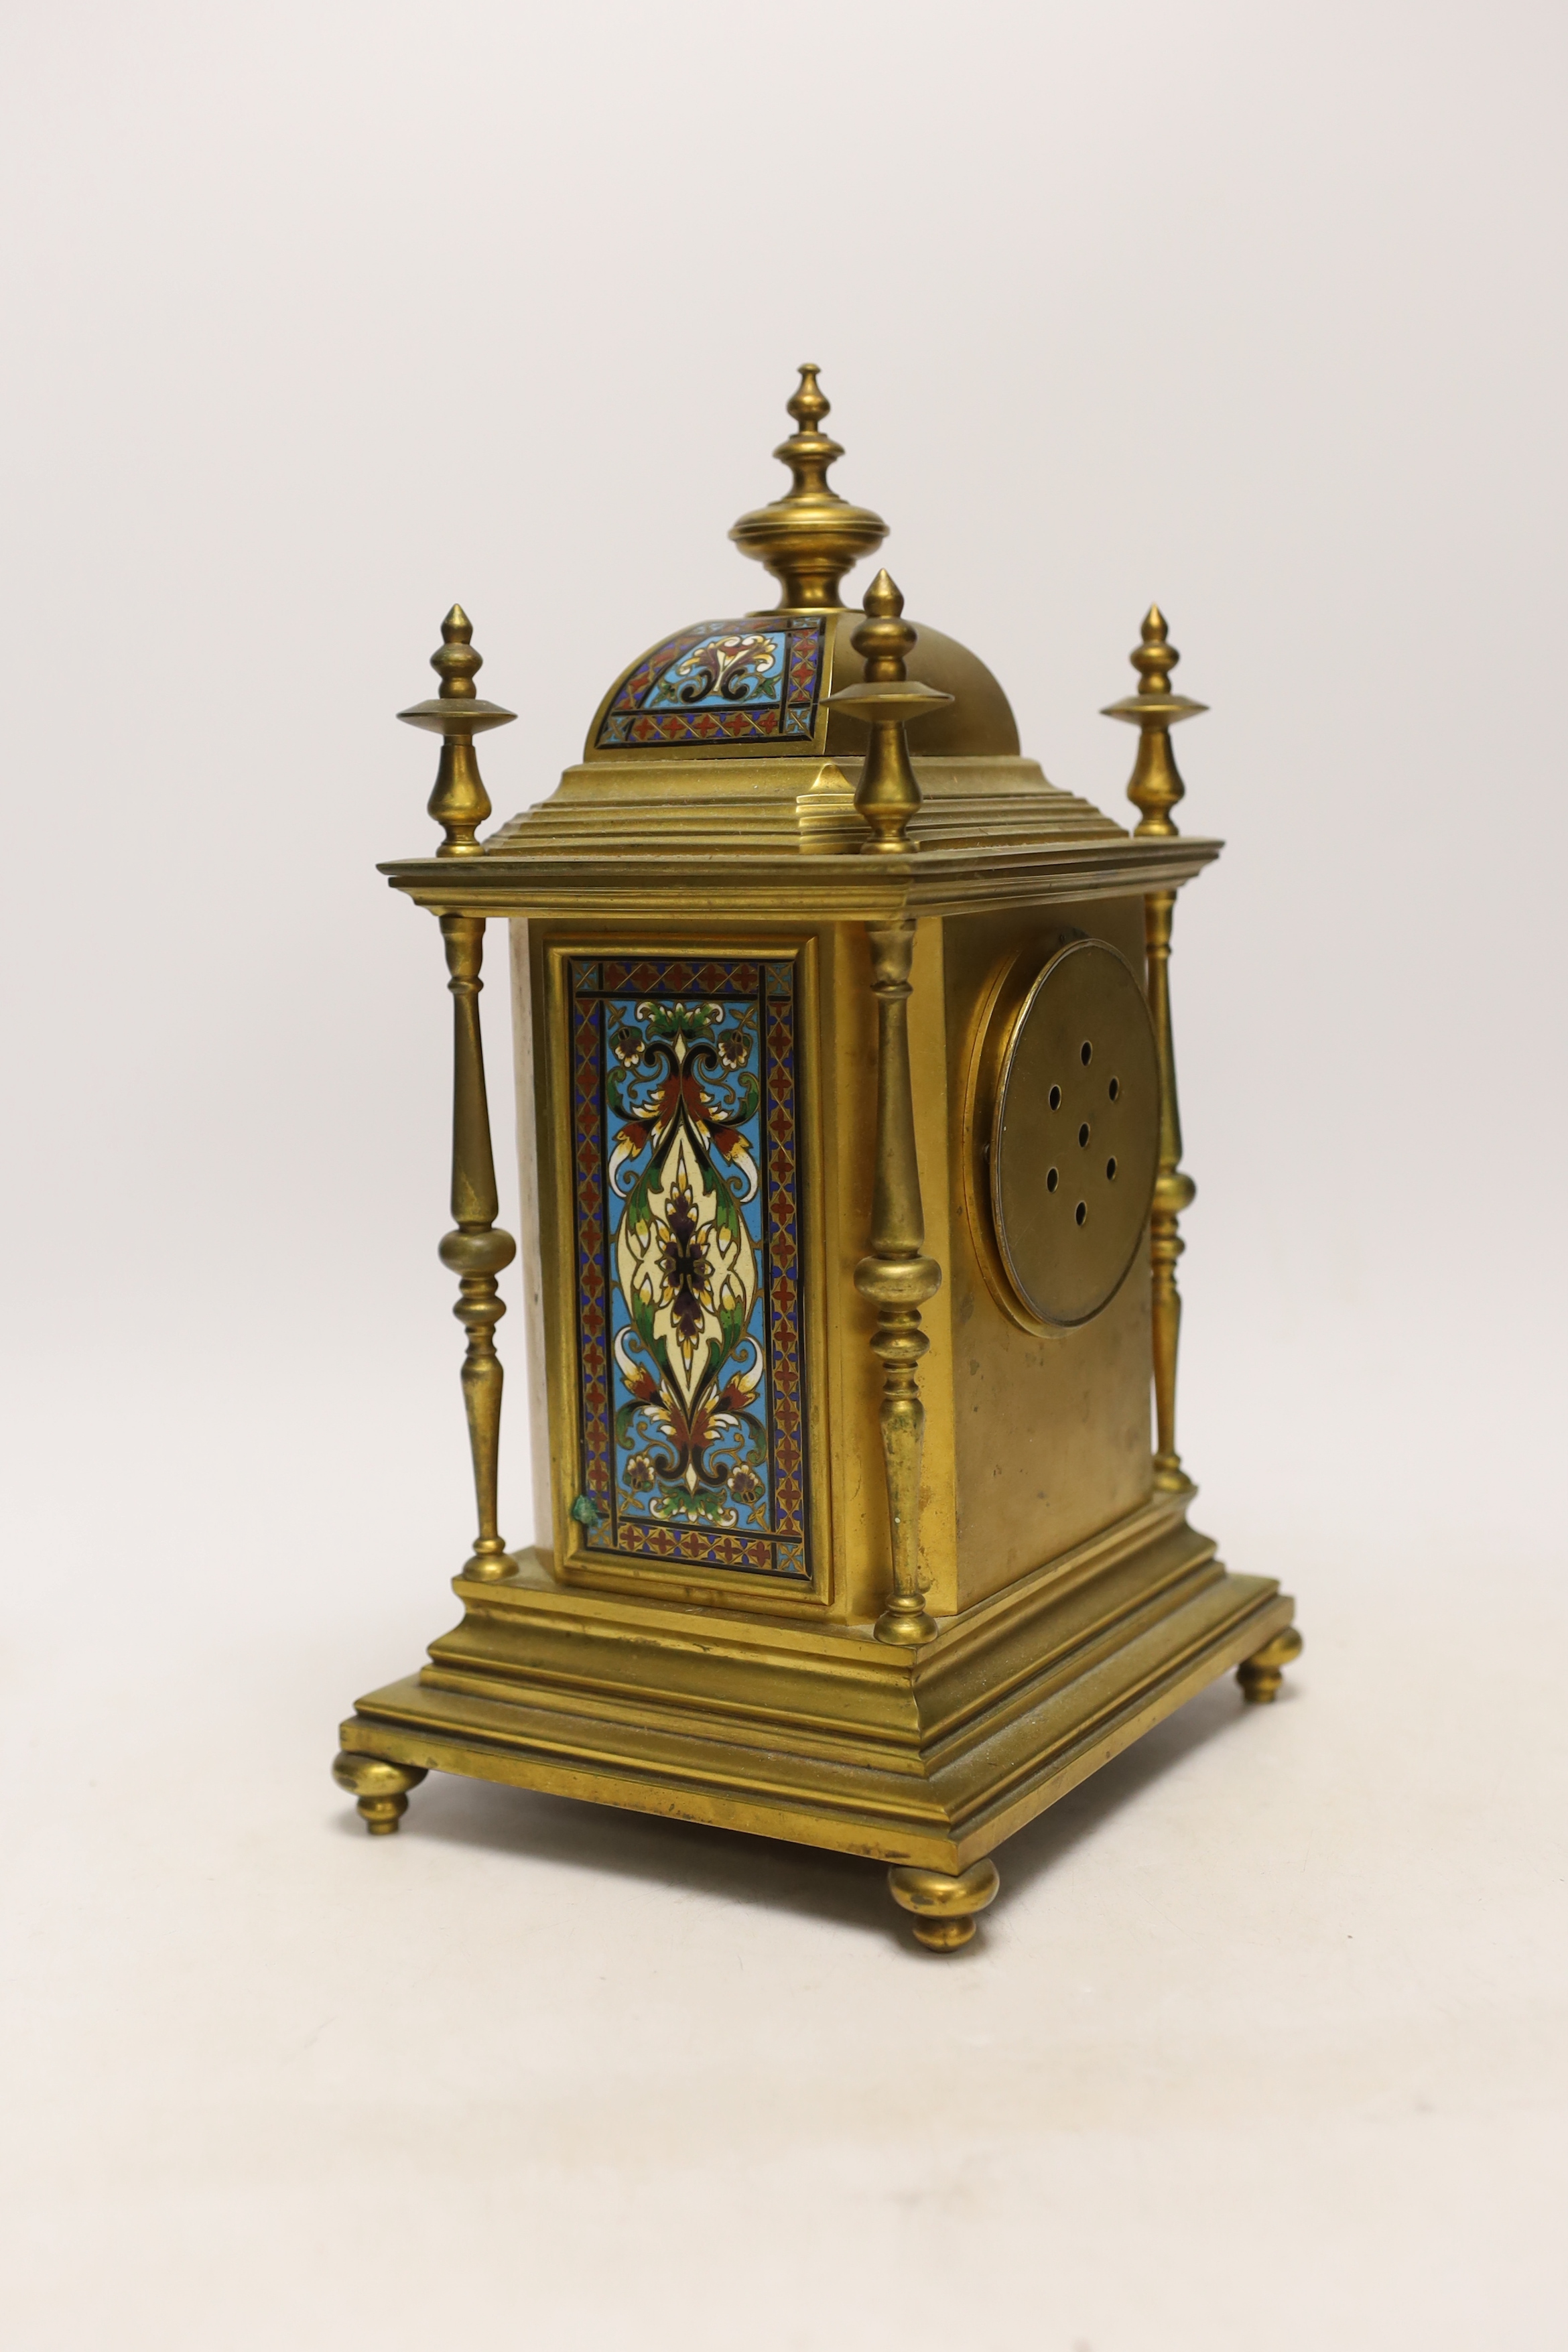 A late 19th/early 20th century French champleve and gilt metal clock garniture, 37cm